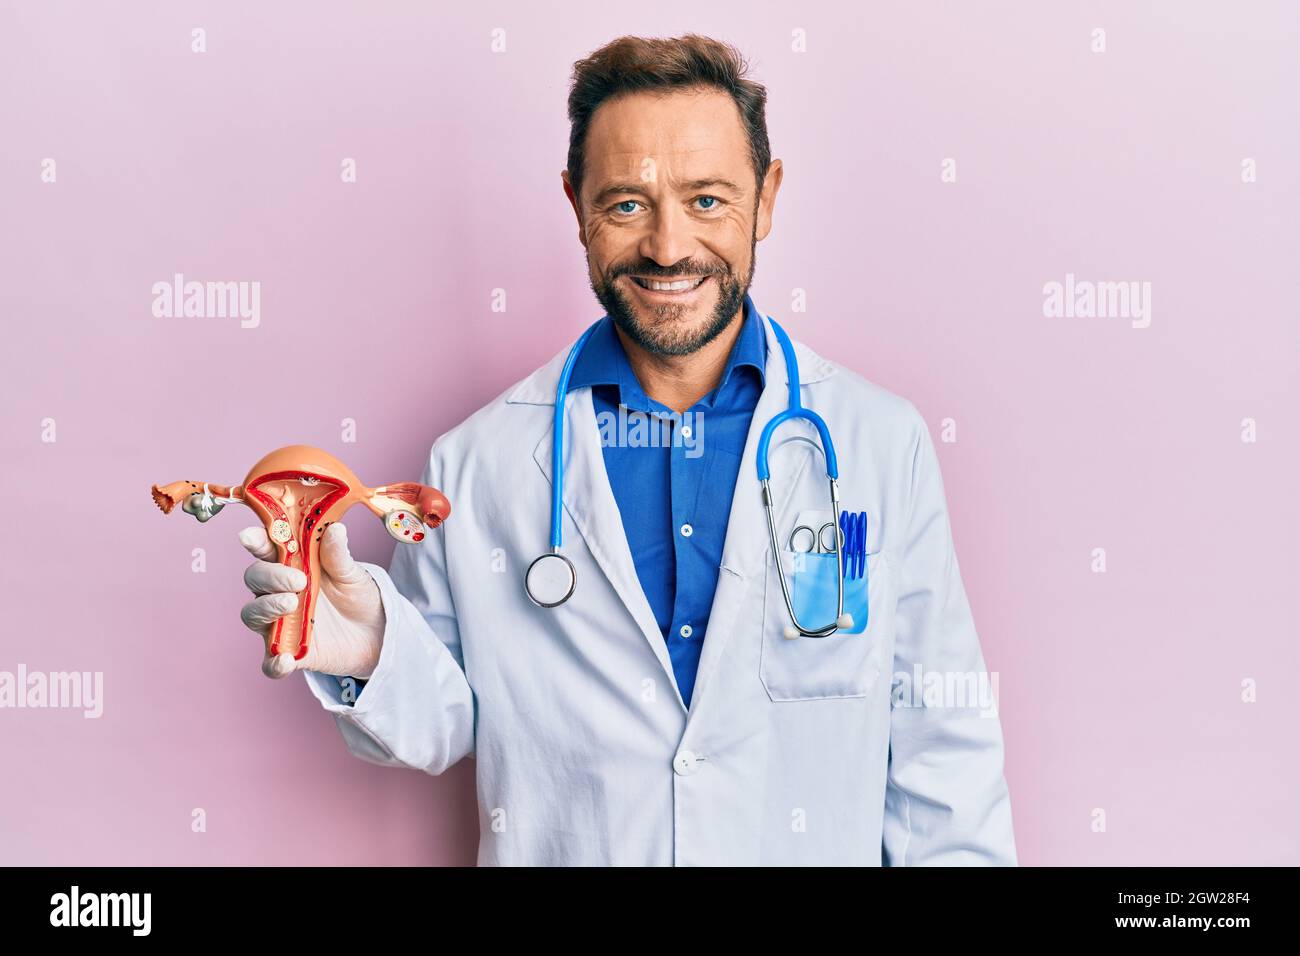 Middle age gynecologist man holding anatomical model of female genital organ looking positive and happy standing and smiling with a confident smile sh Stock Photo